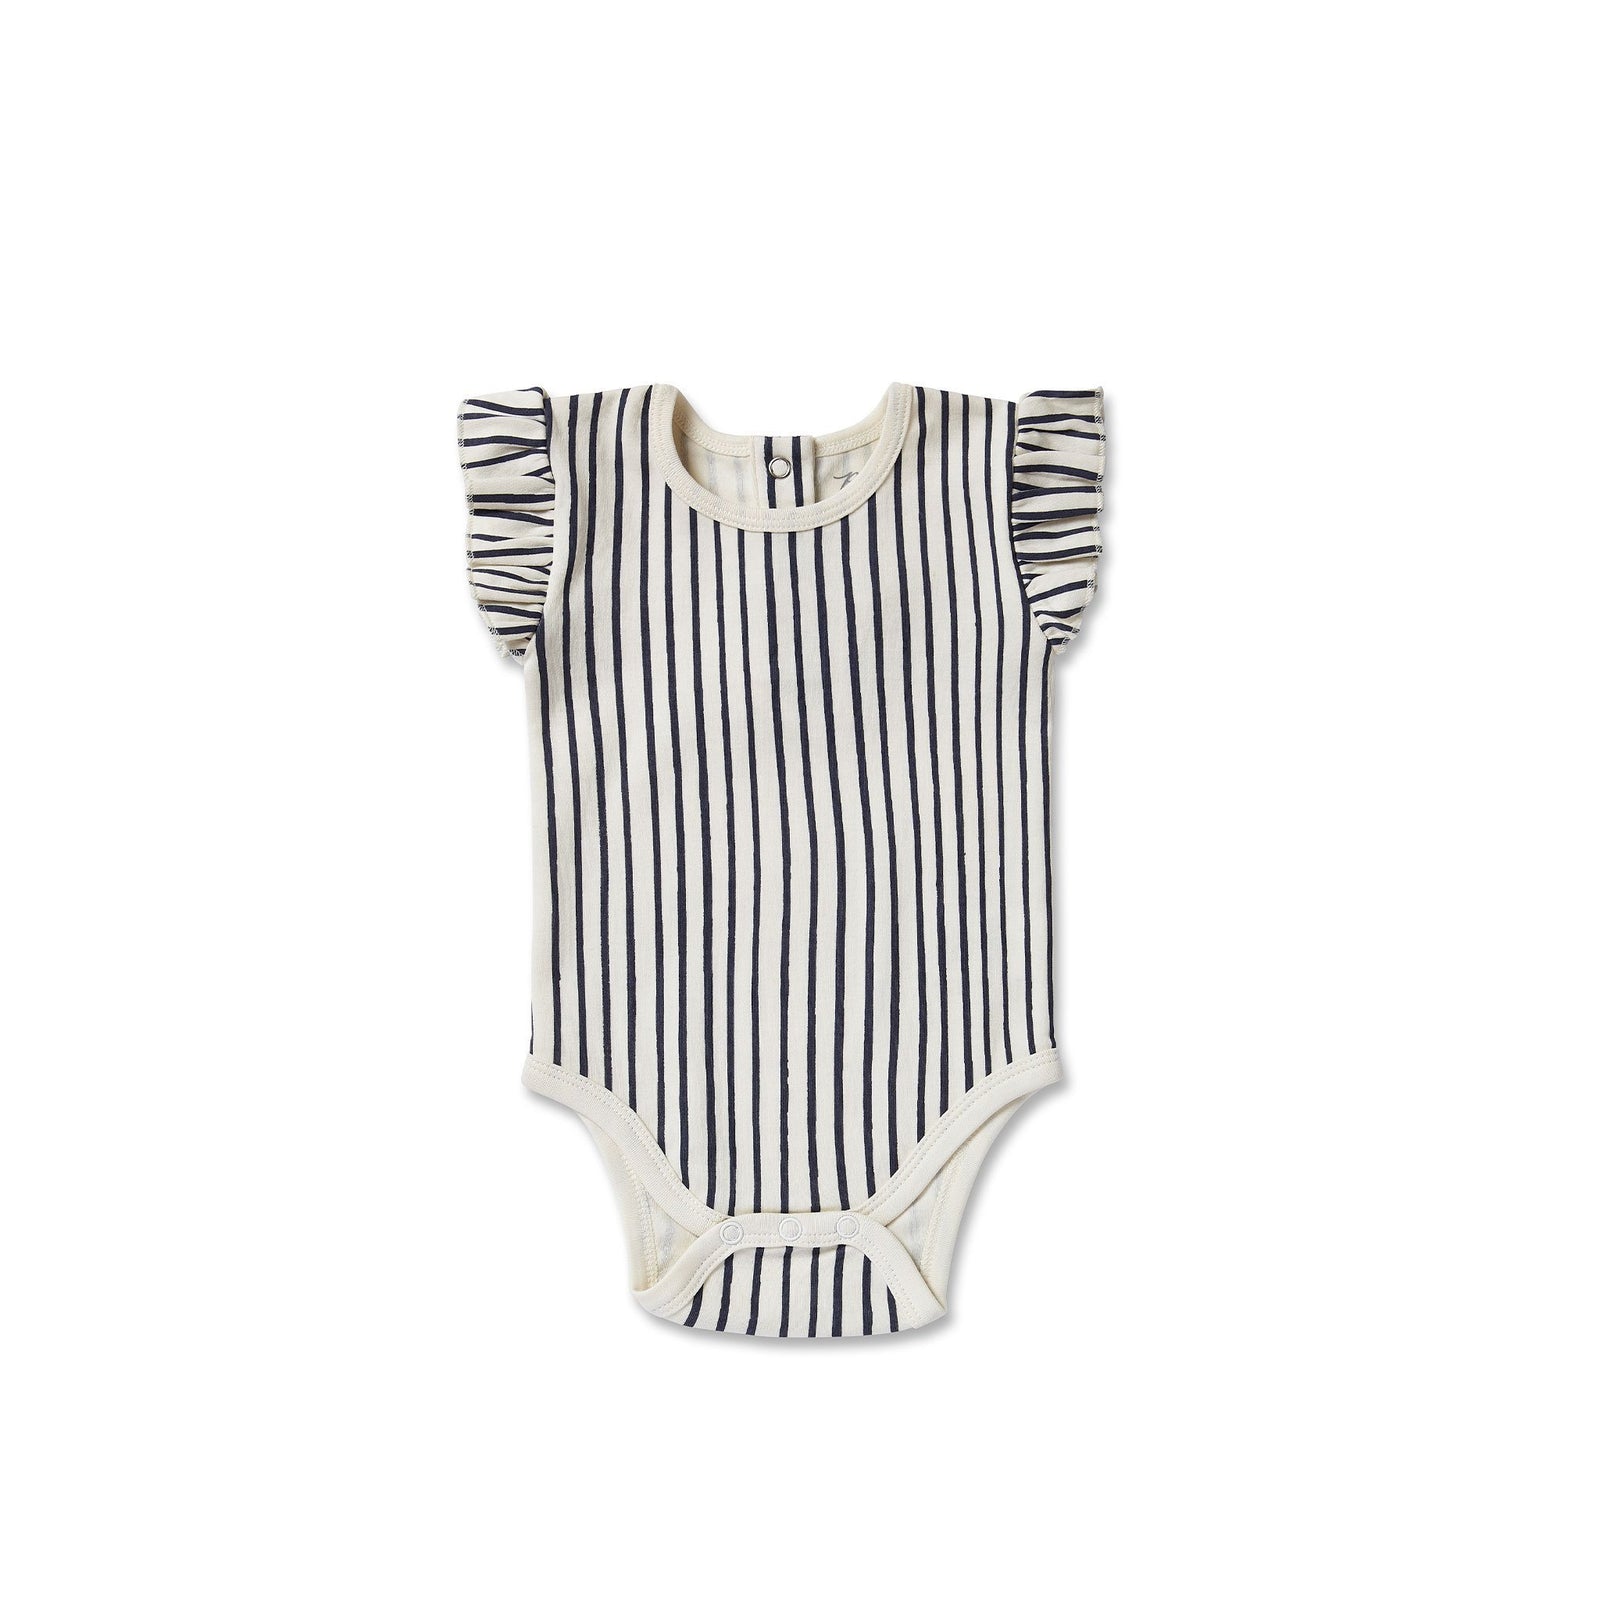 Pehr Stripes Away ink Blue with Ruffle Organic One-Piece, Short Sleeve. GOTS Certified Organic Cotton & Dyes. White with dark blue stripes, ruffles on shoulders, bottom closure at bottom.